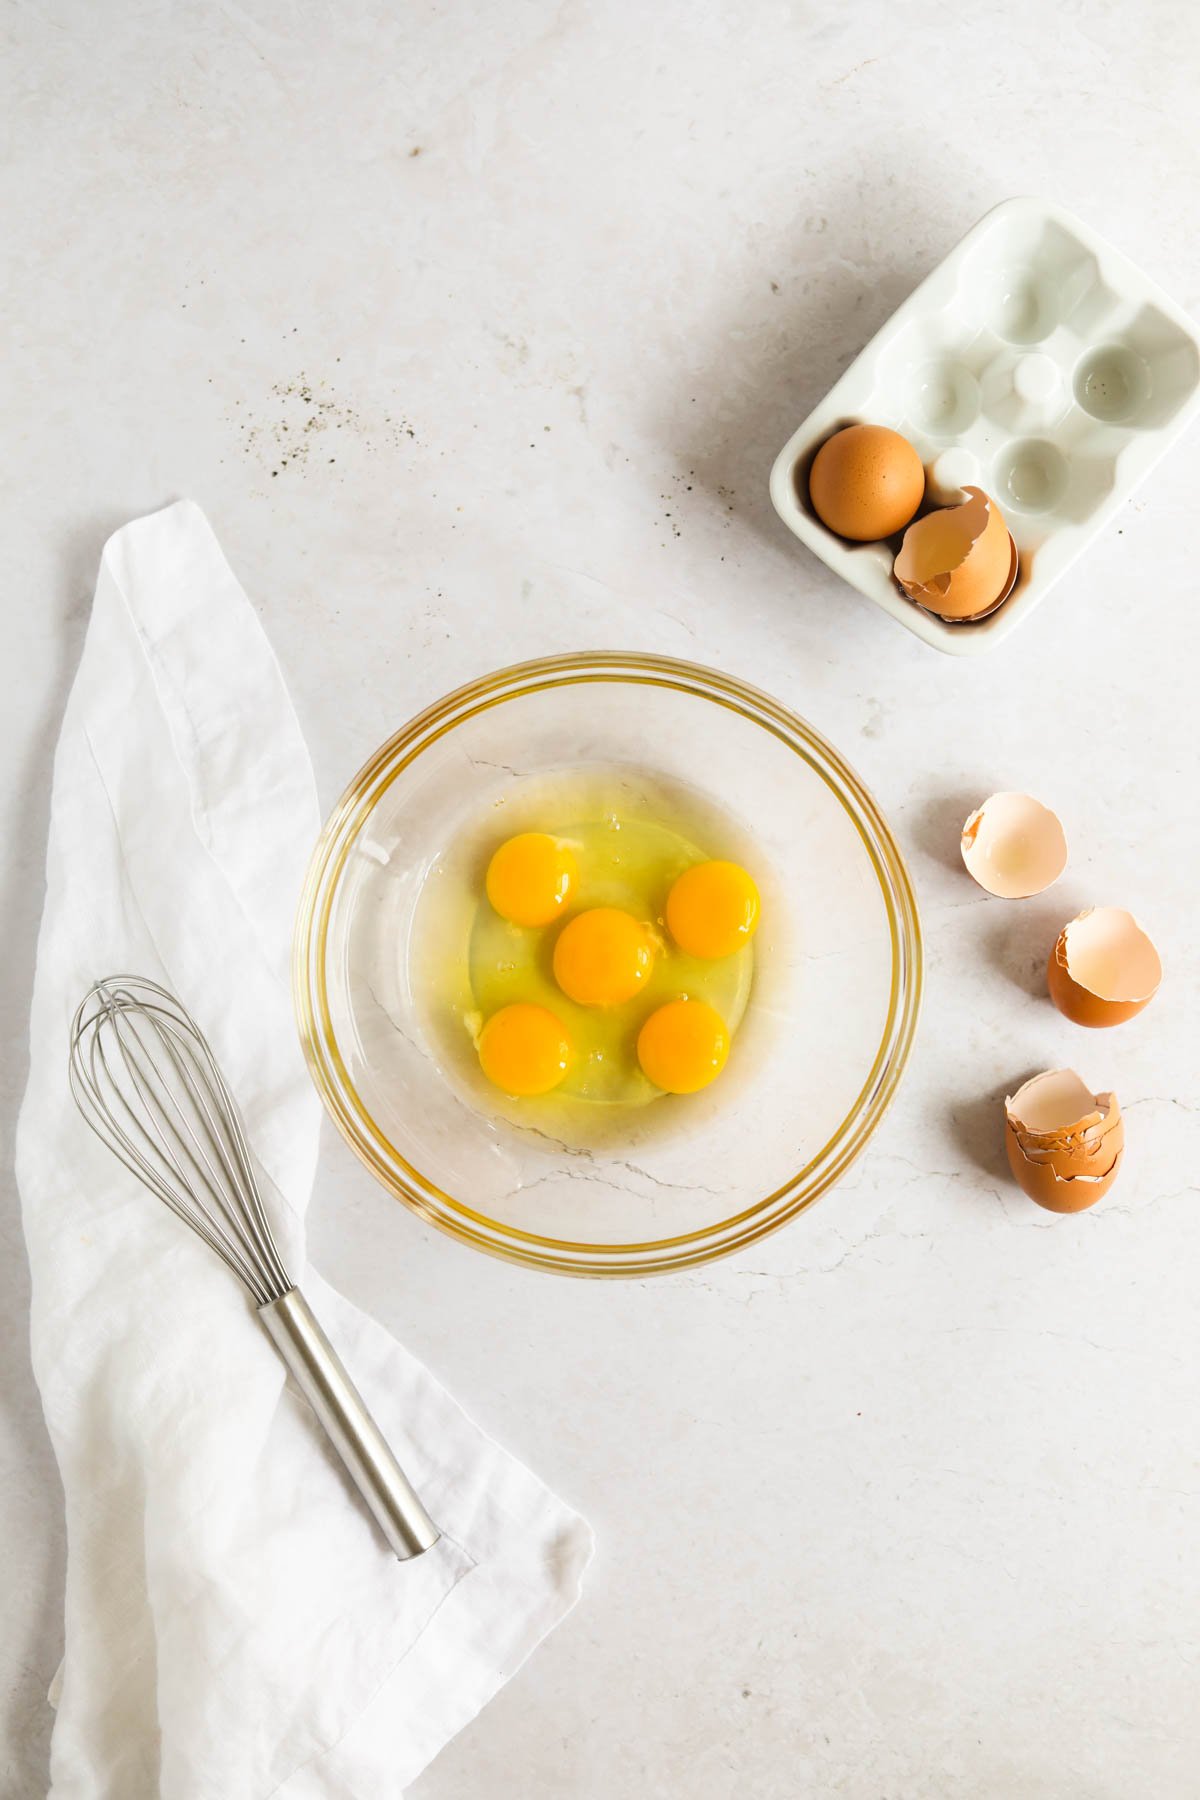 pasture-raised eggs in a glass mixing bowl with a stainless steel whisk. Eggs in a white egg carton